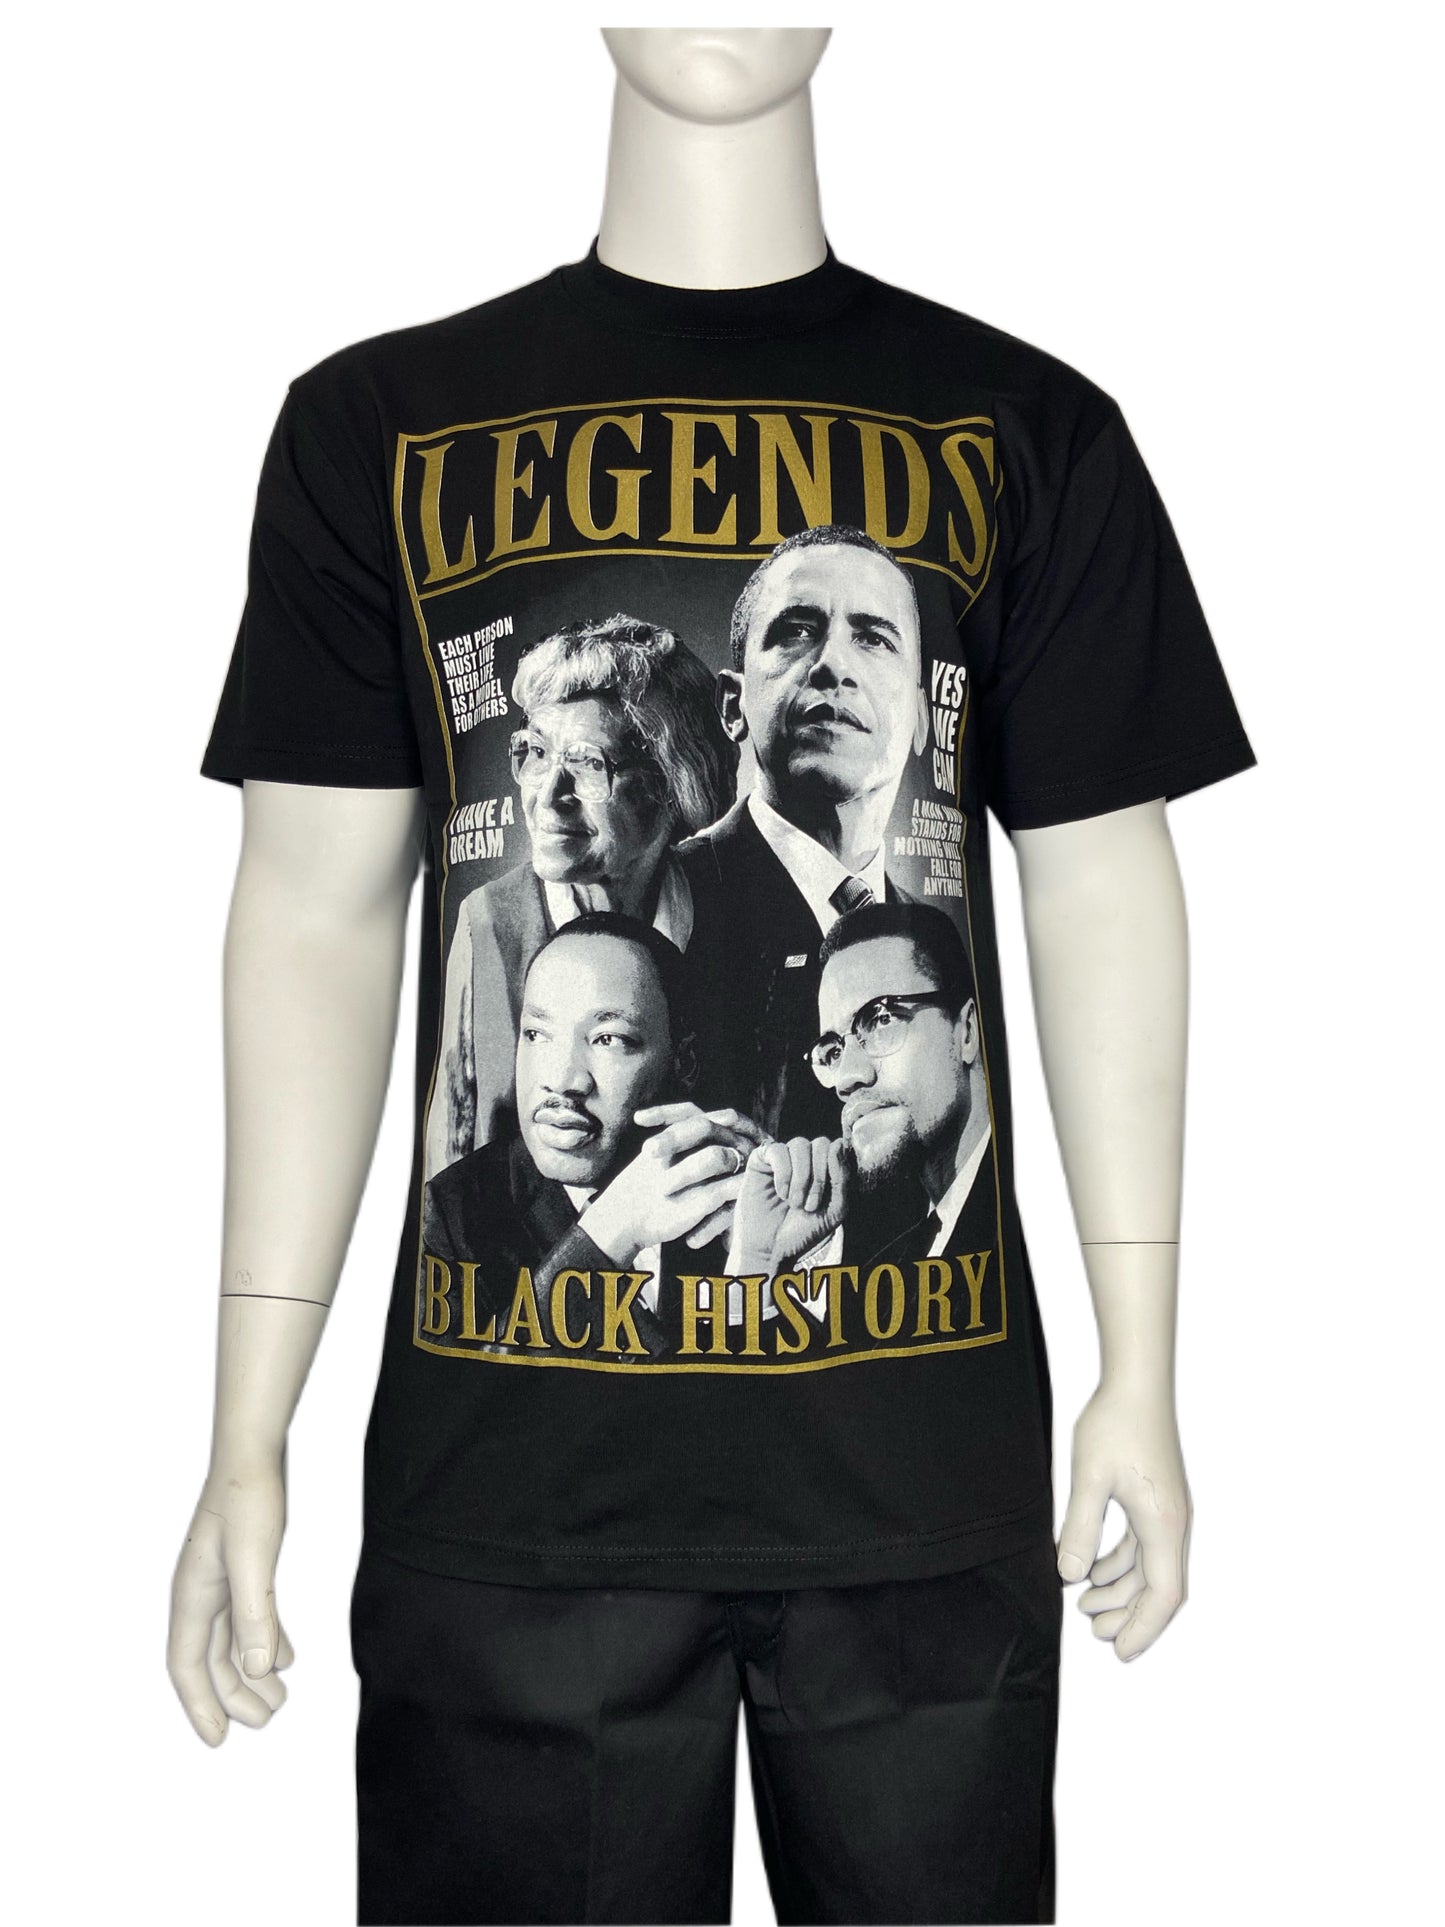 Heavyweight Black History Legends Double-Sided Graphic T-shirt